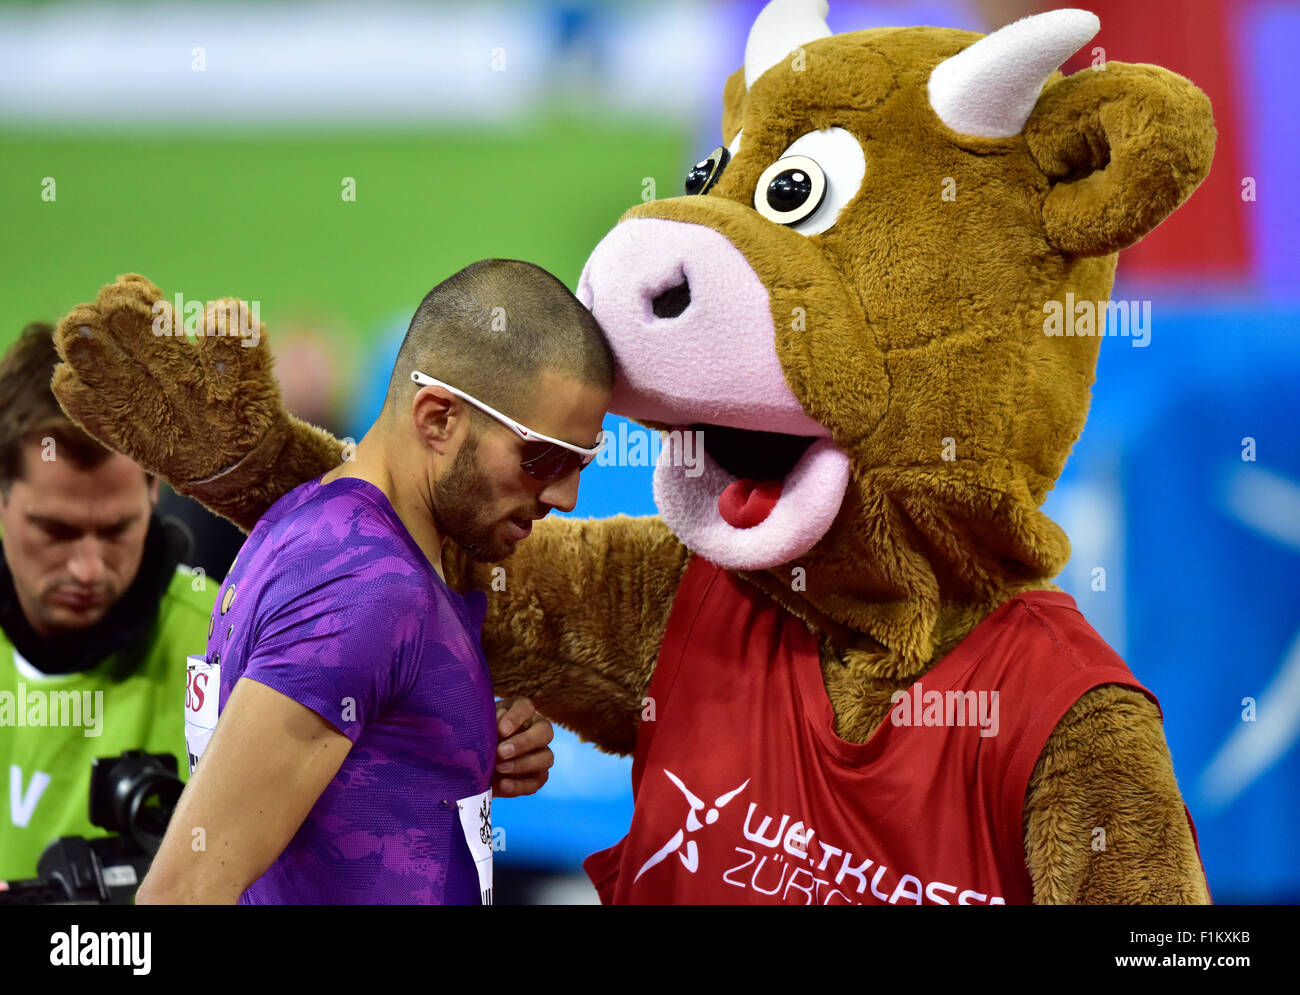 Zurich, Switzerland. 03rd Sep, 2015. Meeting mascot Cooly hugs Swiss local idol Kariem Hussein (SUI) after he won the 400m hurdles race at the 2015 Zurich IAAF Diamond League athletics meeting. Credit:  Erik Tham/Alamy Live News Stock Photo